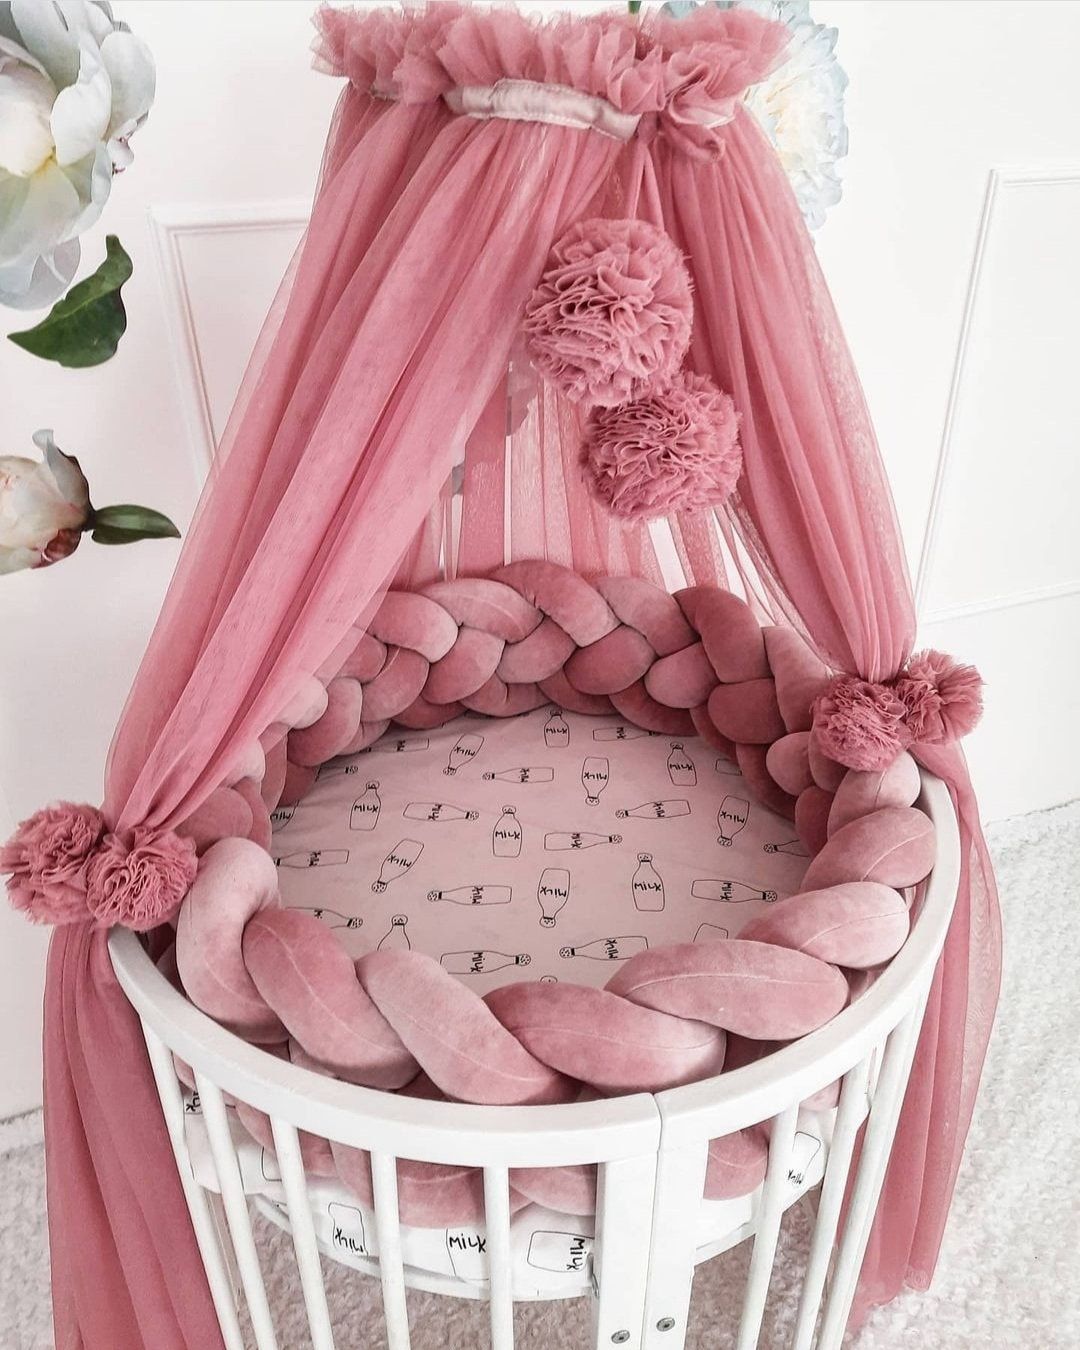 Bed tulle canopy for nursery, Princess playhouse, Crib Canopy, Nursery canopy, Play room canopy, Princess baldachin, Bed Tent +Swan pillow as a gift